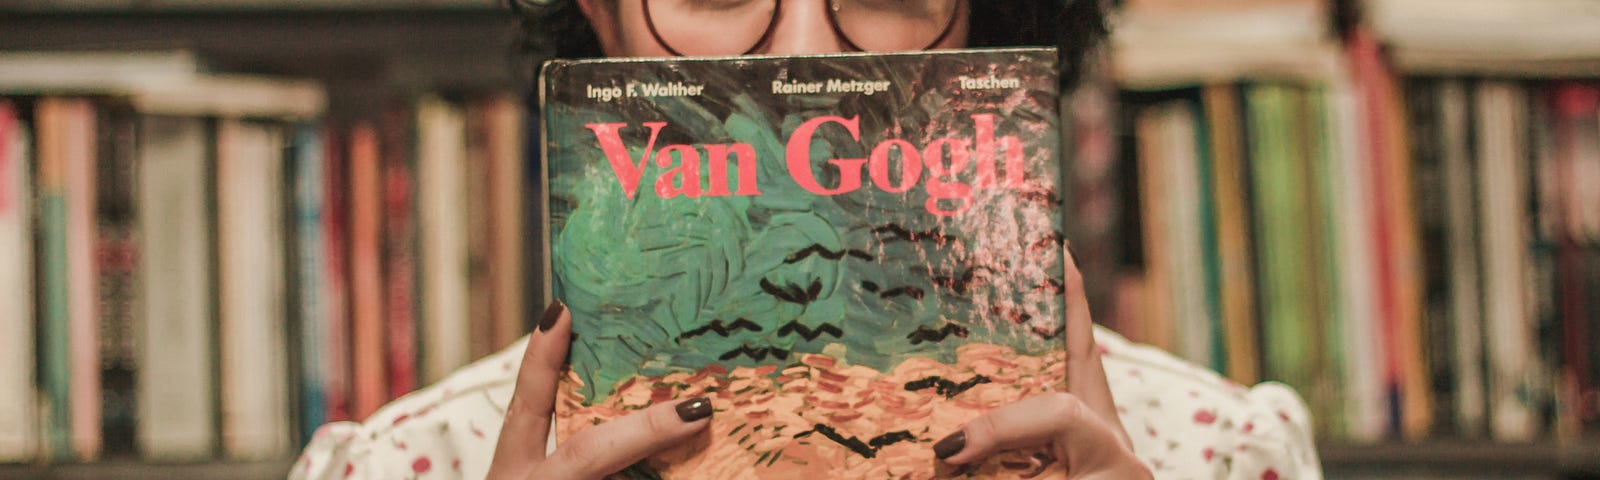 A woman is standing in front of shelves of books, holding a “Van Gogh” book. She is hiding her mouth behind the book, with her eyes and glasses peeking out over the top.